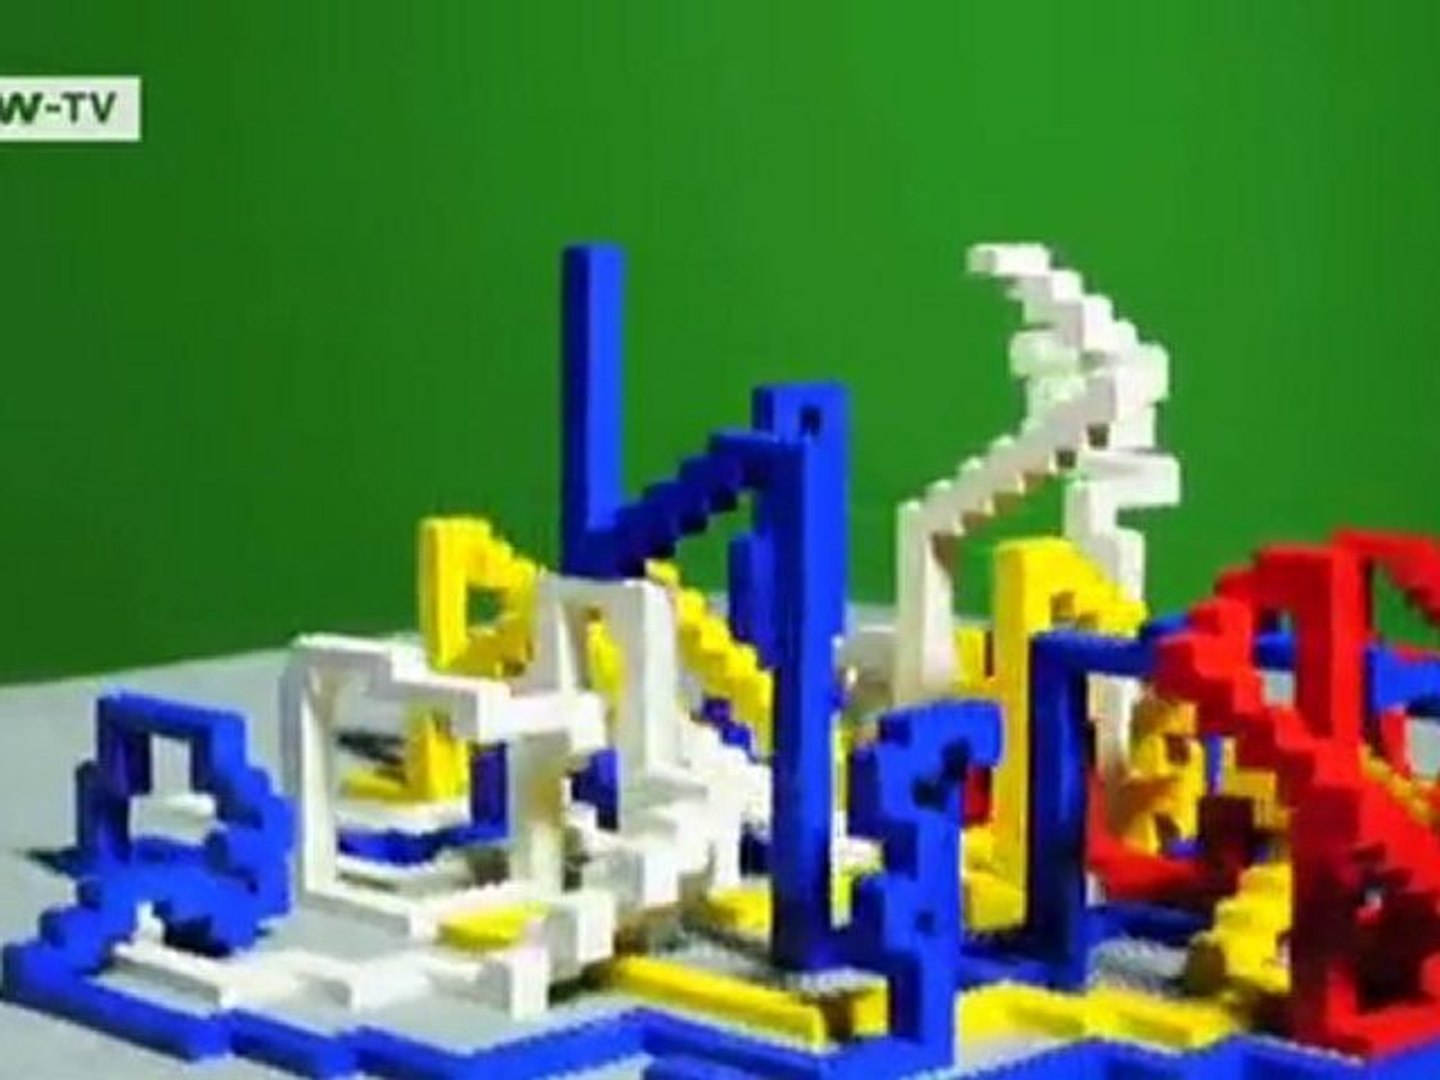 Lego Animation Music Videos | Video of the day